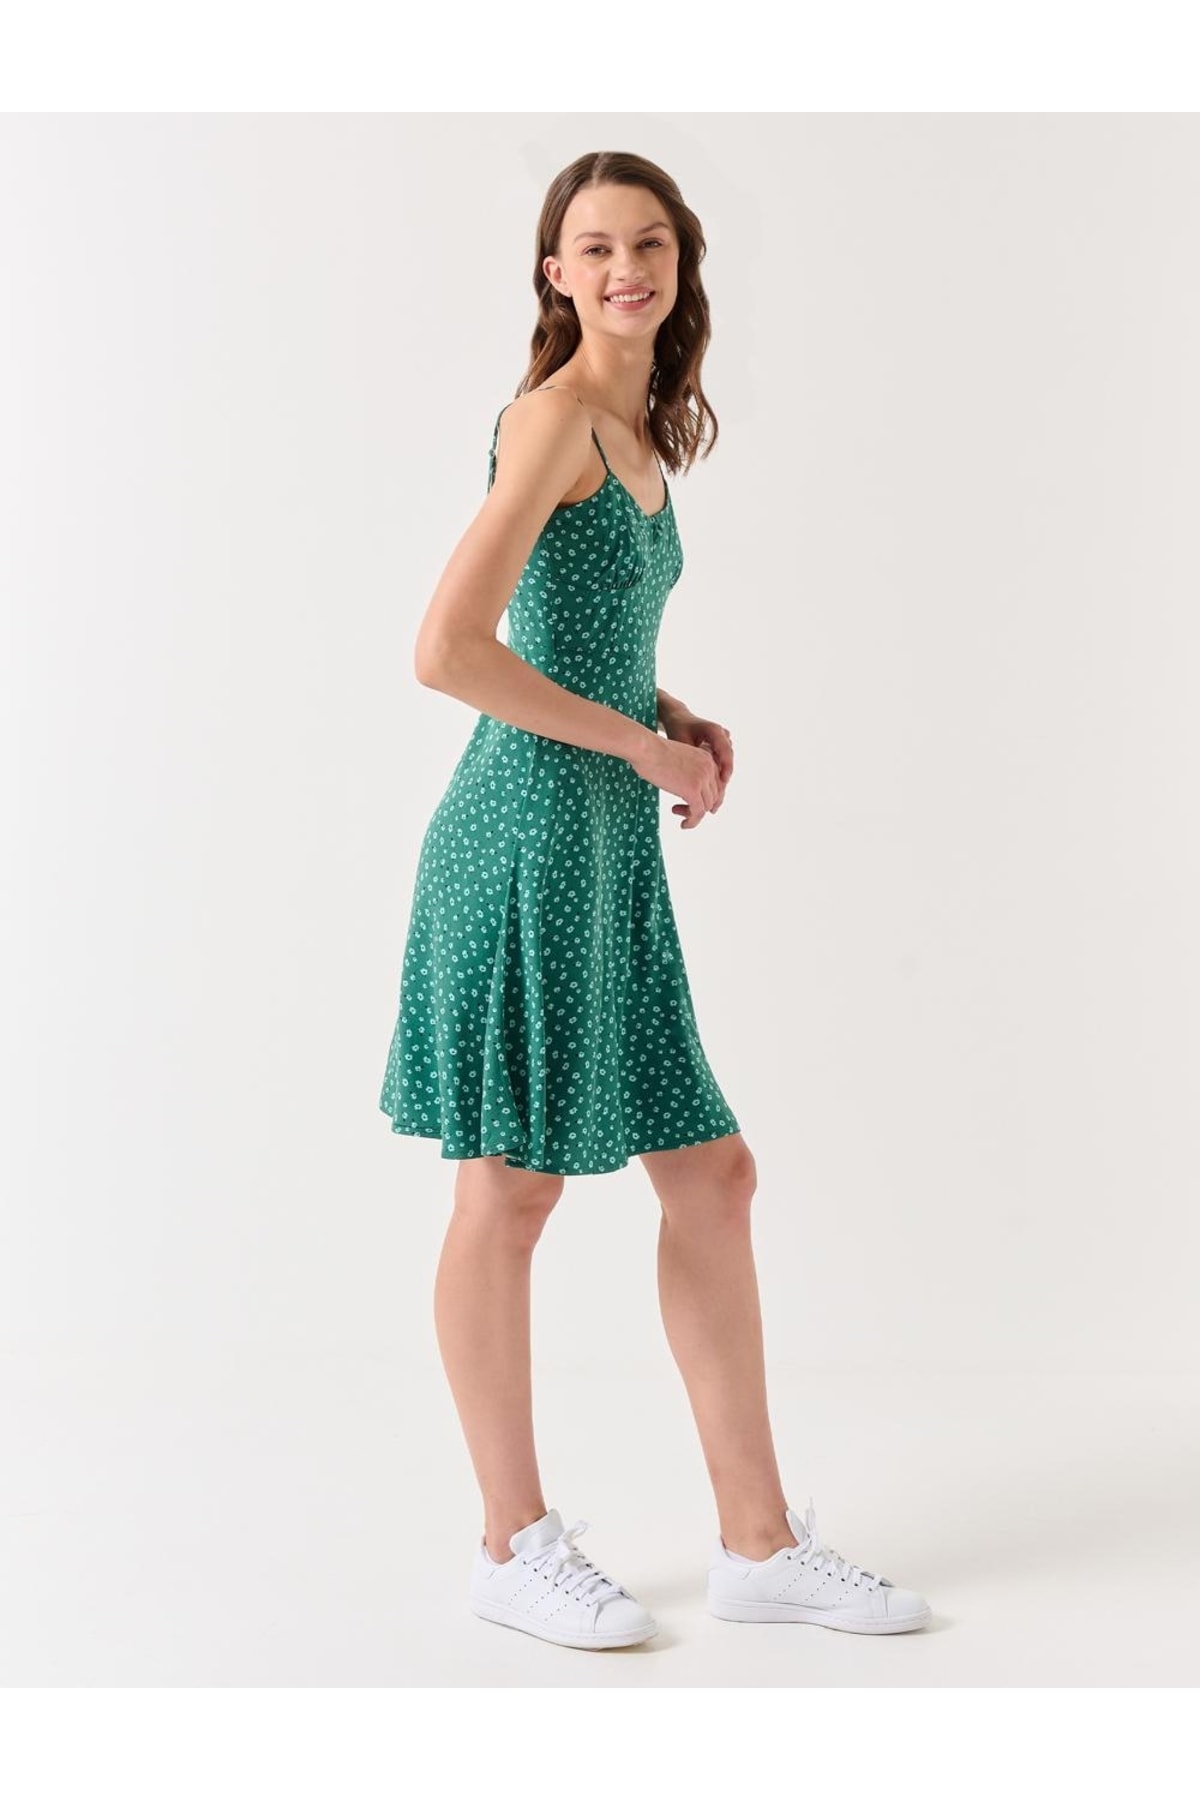 Jimmy Key Emerald Green Woven Straps and a Floral Pattern Dress